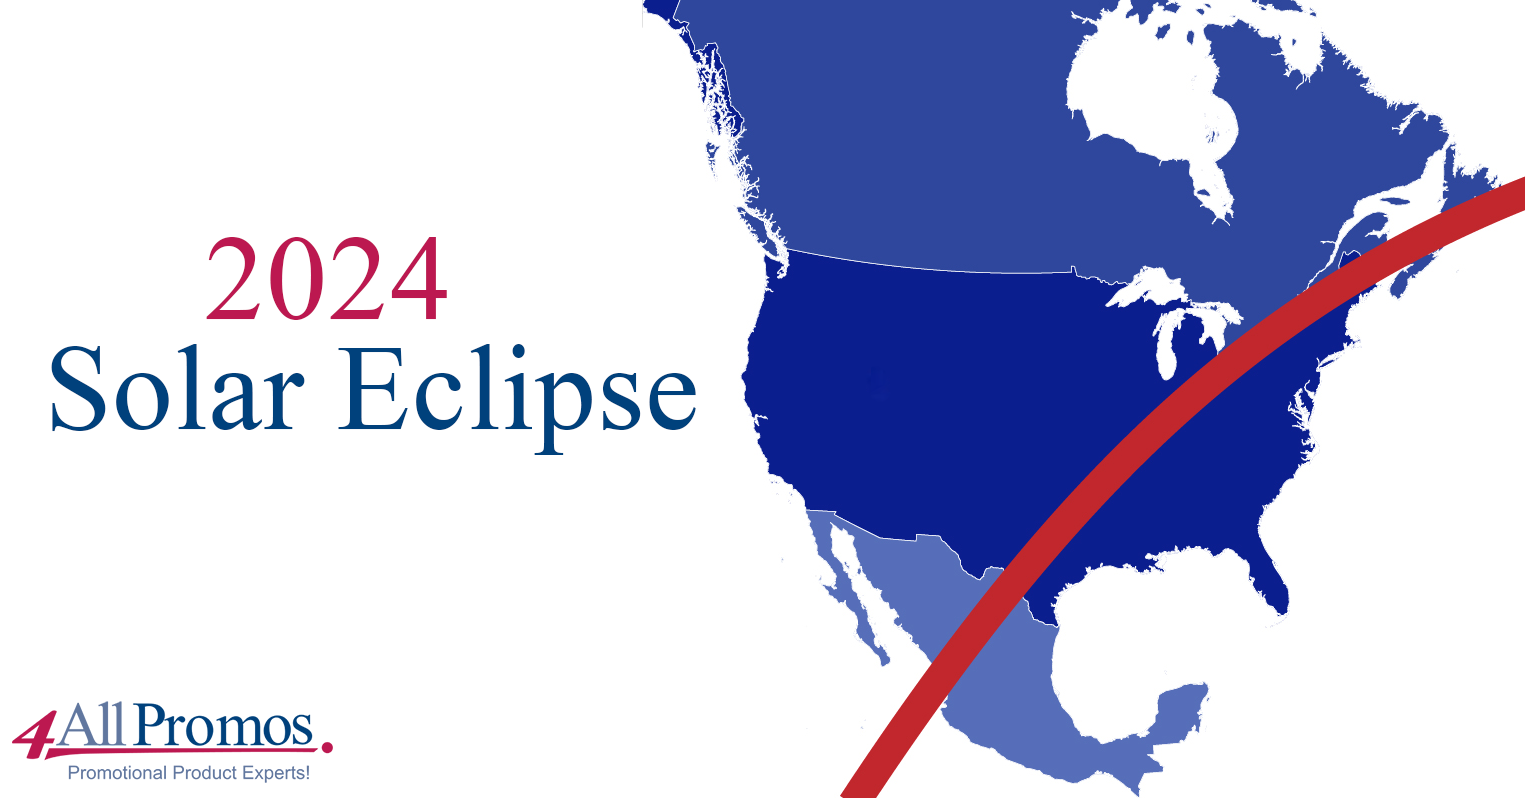 A blue on Blue graphic of North America with a red line showing the trajectory of the eclipse. 